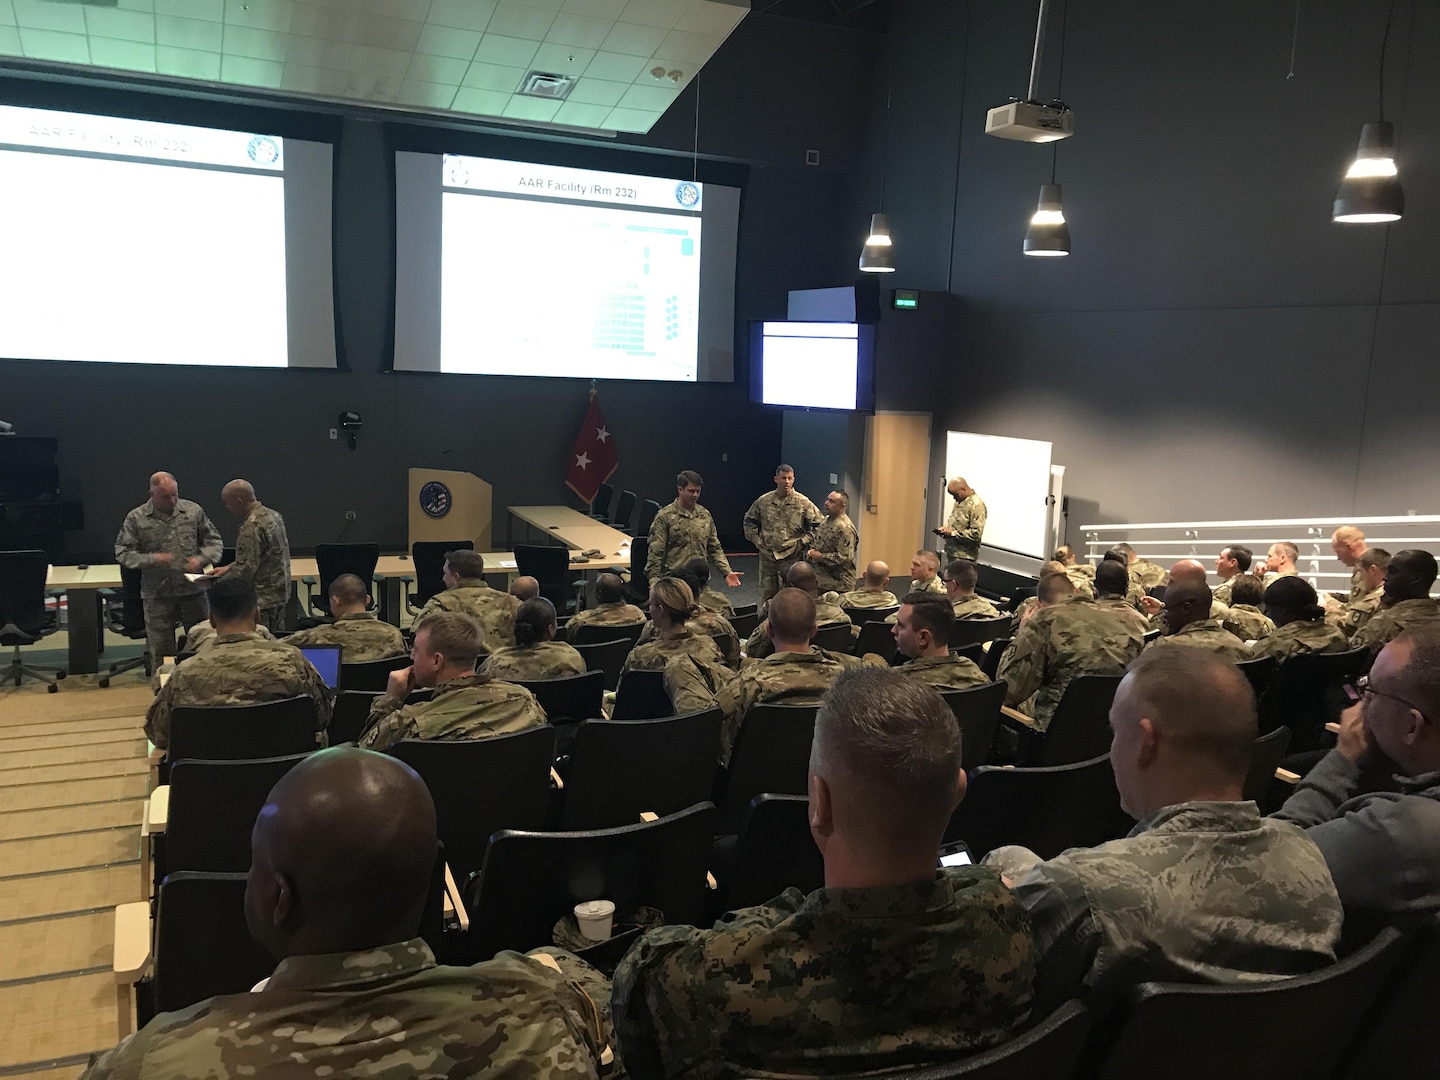 Members of Joint Task Force Civil; Support and the Defense CBRN Response Force attend a Mobile Training Team event at Ft. Bragg, N.C. Nov. 14, 2017. JTF-CS provides command and control for designated Department of Defense specialized response forces to assist local, state, federal and tribal partners in saving lives, preventing further injury, and providing critical support to enable community recovery. (Official DOD Photo MC2 Benjamin Liston)